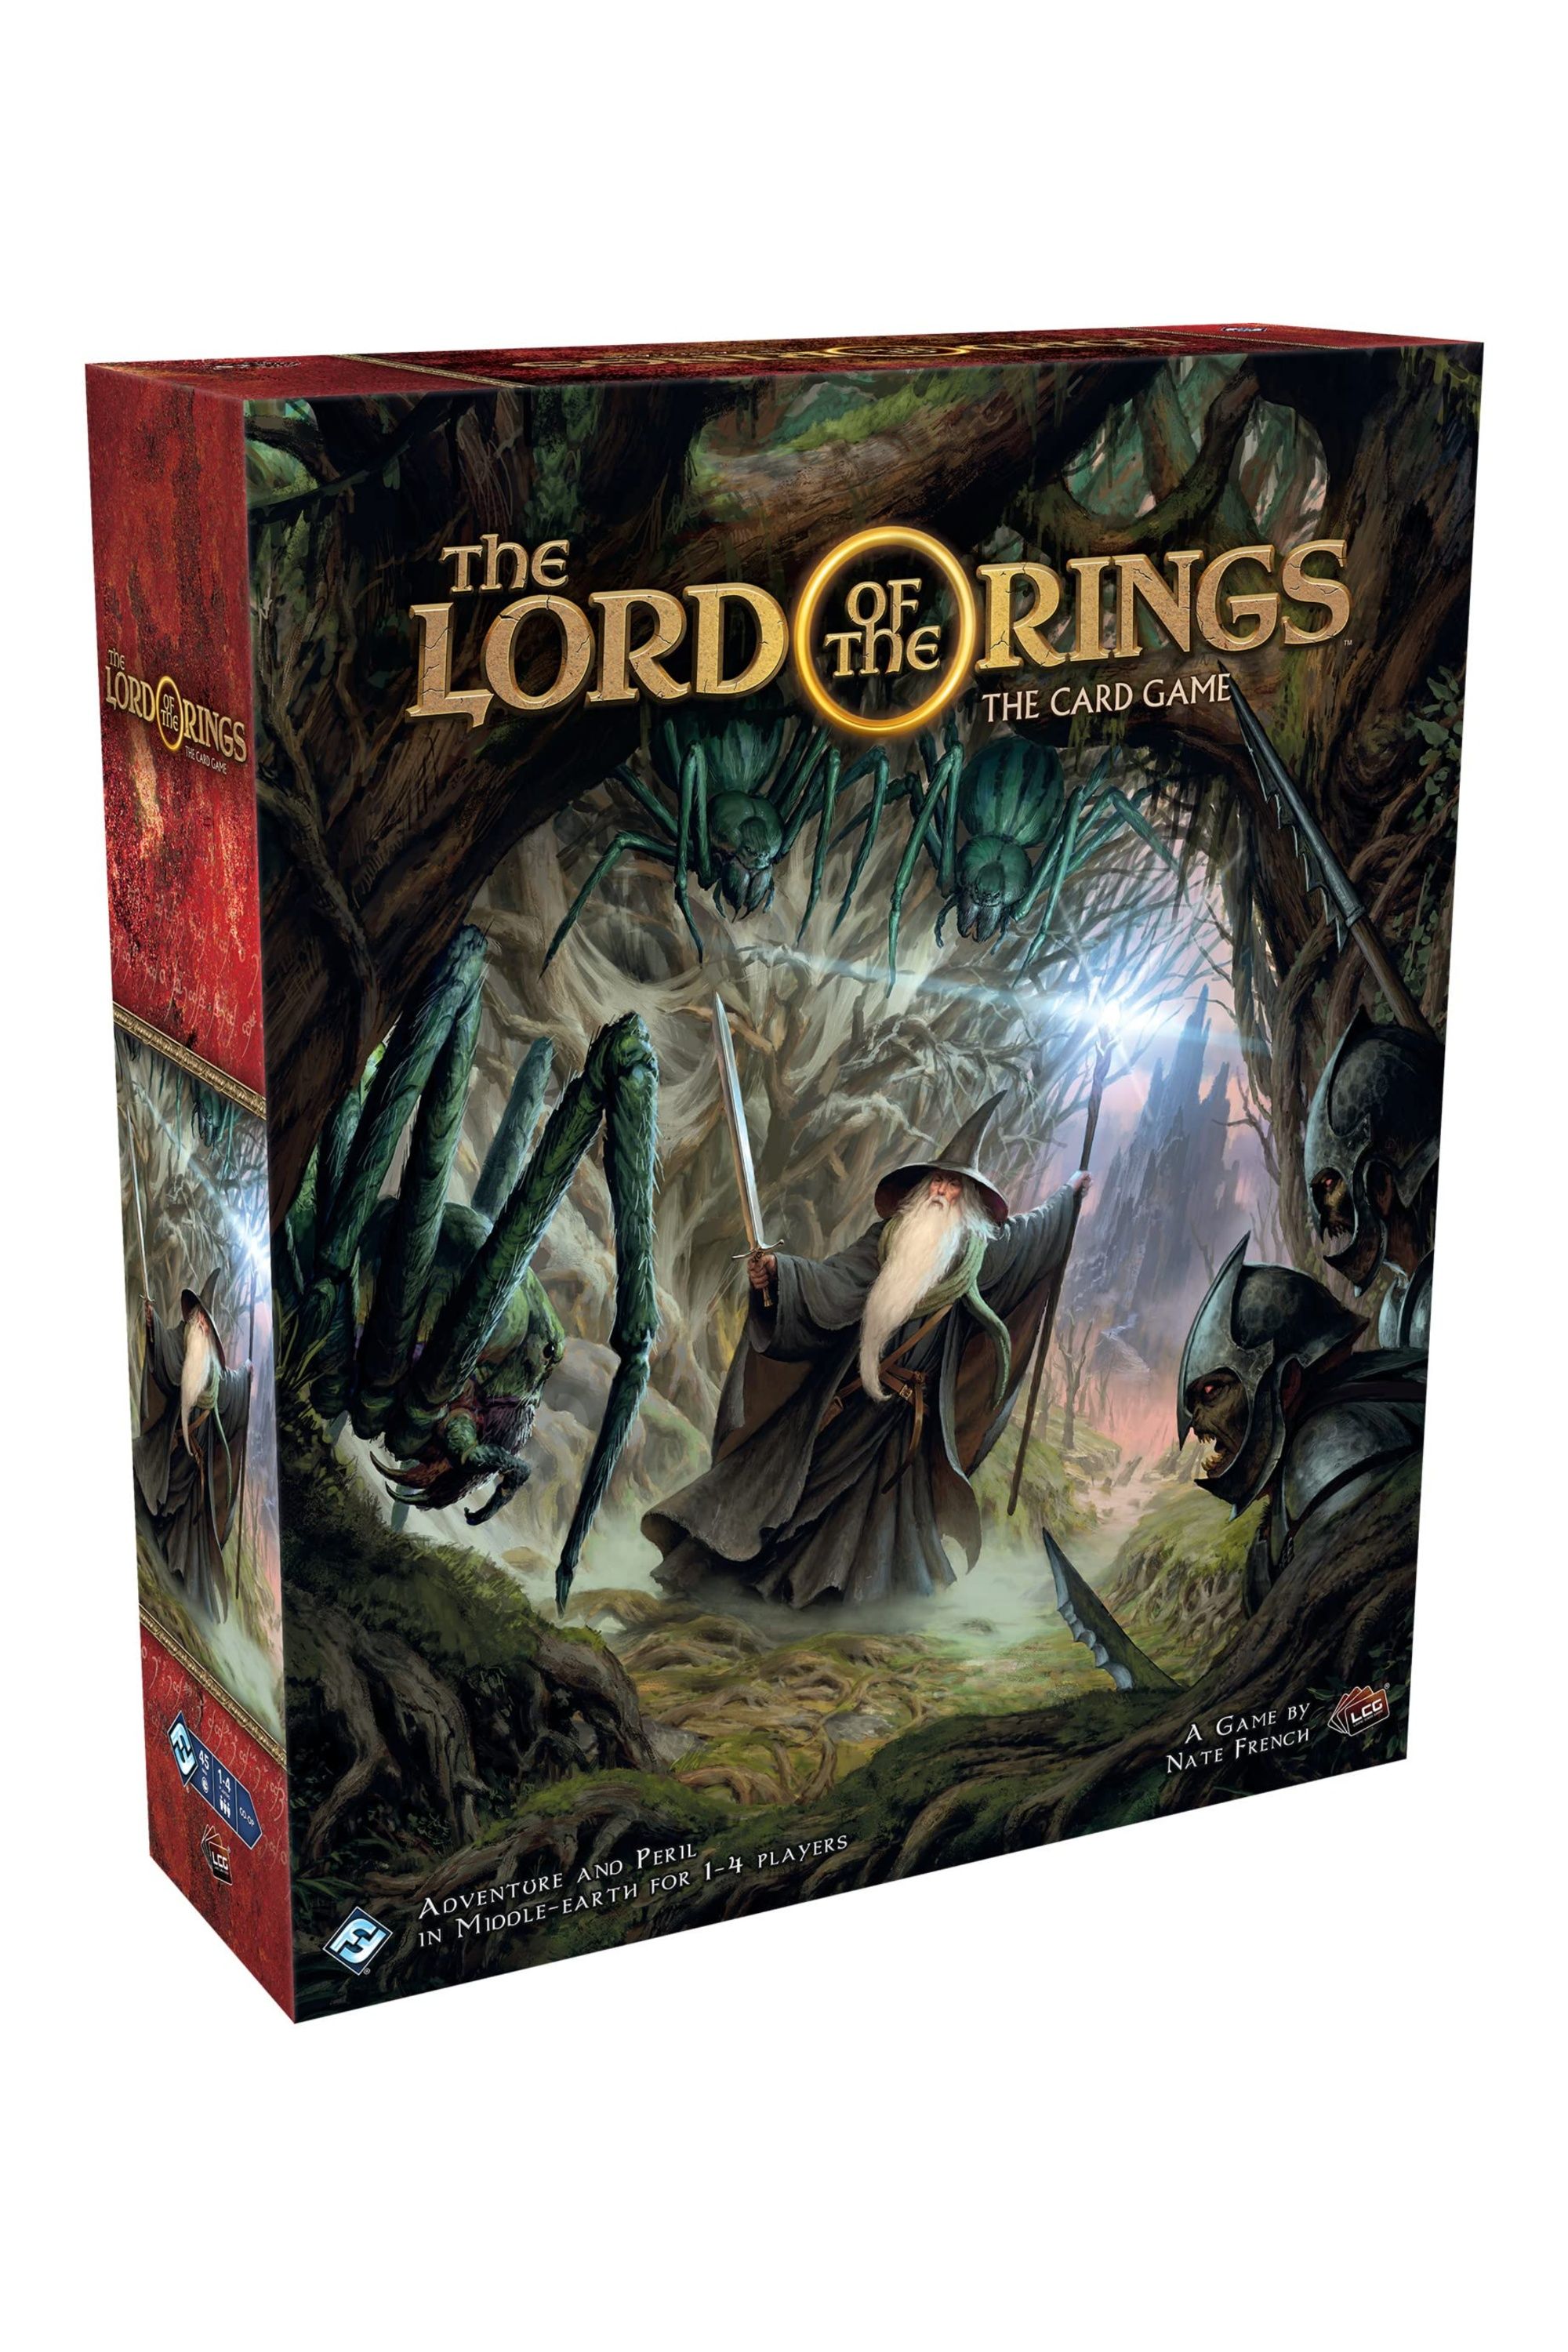 The Lord Of The Rings: The Card Game box